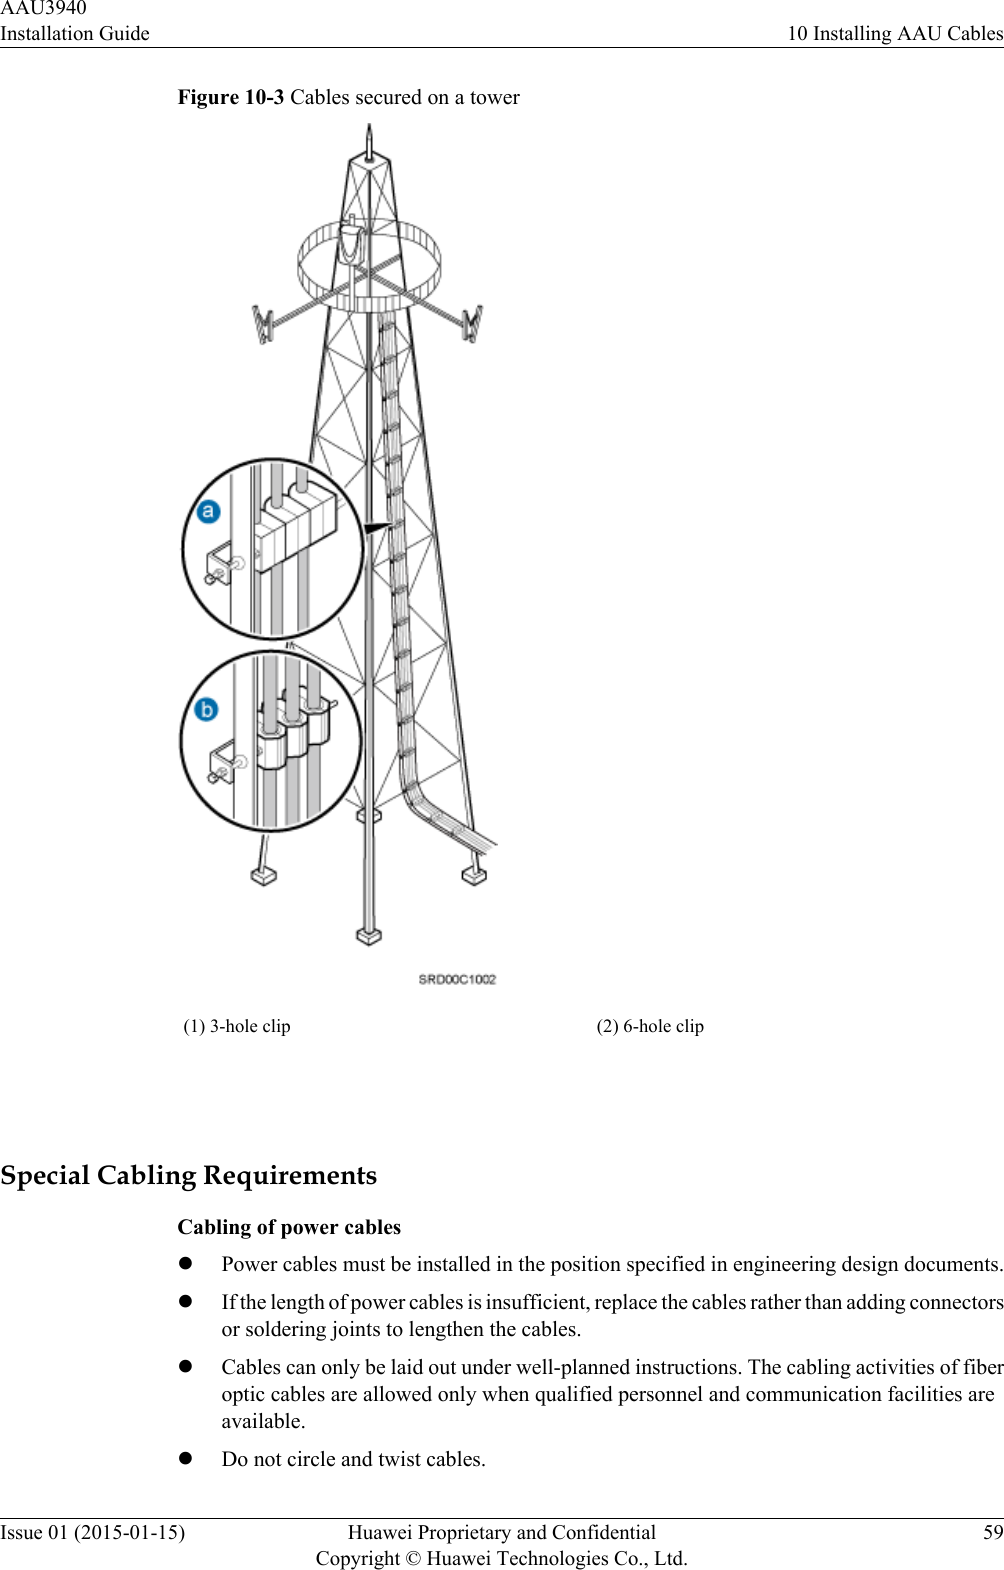 Figure 10-3 Cables secured on a tower(1) 3-hole clip (2) 6-hole clip Special Cabling RequirementsCabling of power cableslPower cables must be installed in the position specified in engineering design documents.lIf the length of power cables is insufficient, replace the cables rather than adding connectorsor soldering joints to lengthen the cables.lCables can only be laid out under well-planned instructions. The cabling activities of fiberoptic cables are allowed only when qualified personnel and communication facilities areavailable.lDo not circle and twist cables.AAU3940Installation Guide 10 Installing AAU CablesIssue 01 (2015-01-15) Huawei Proprietary and ConfidentialCopyright © Huawei Technologies Co., Ltd.59